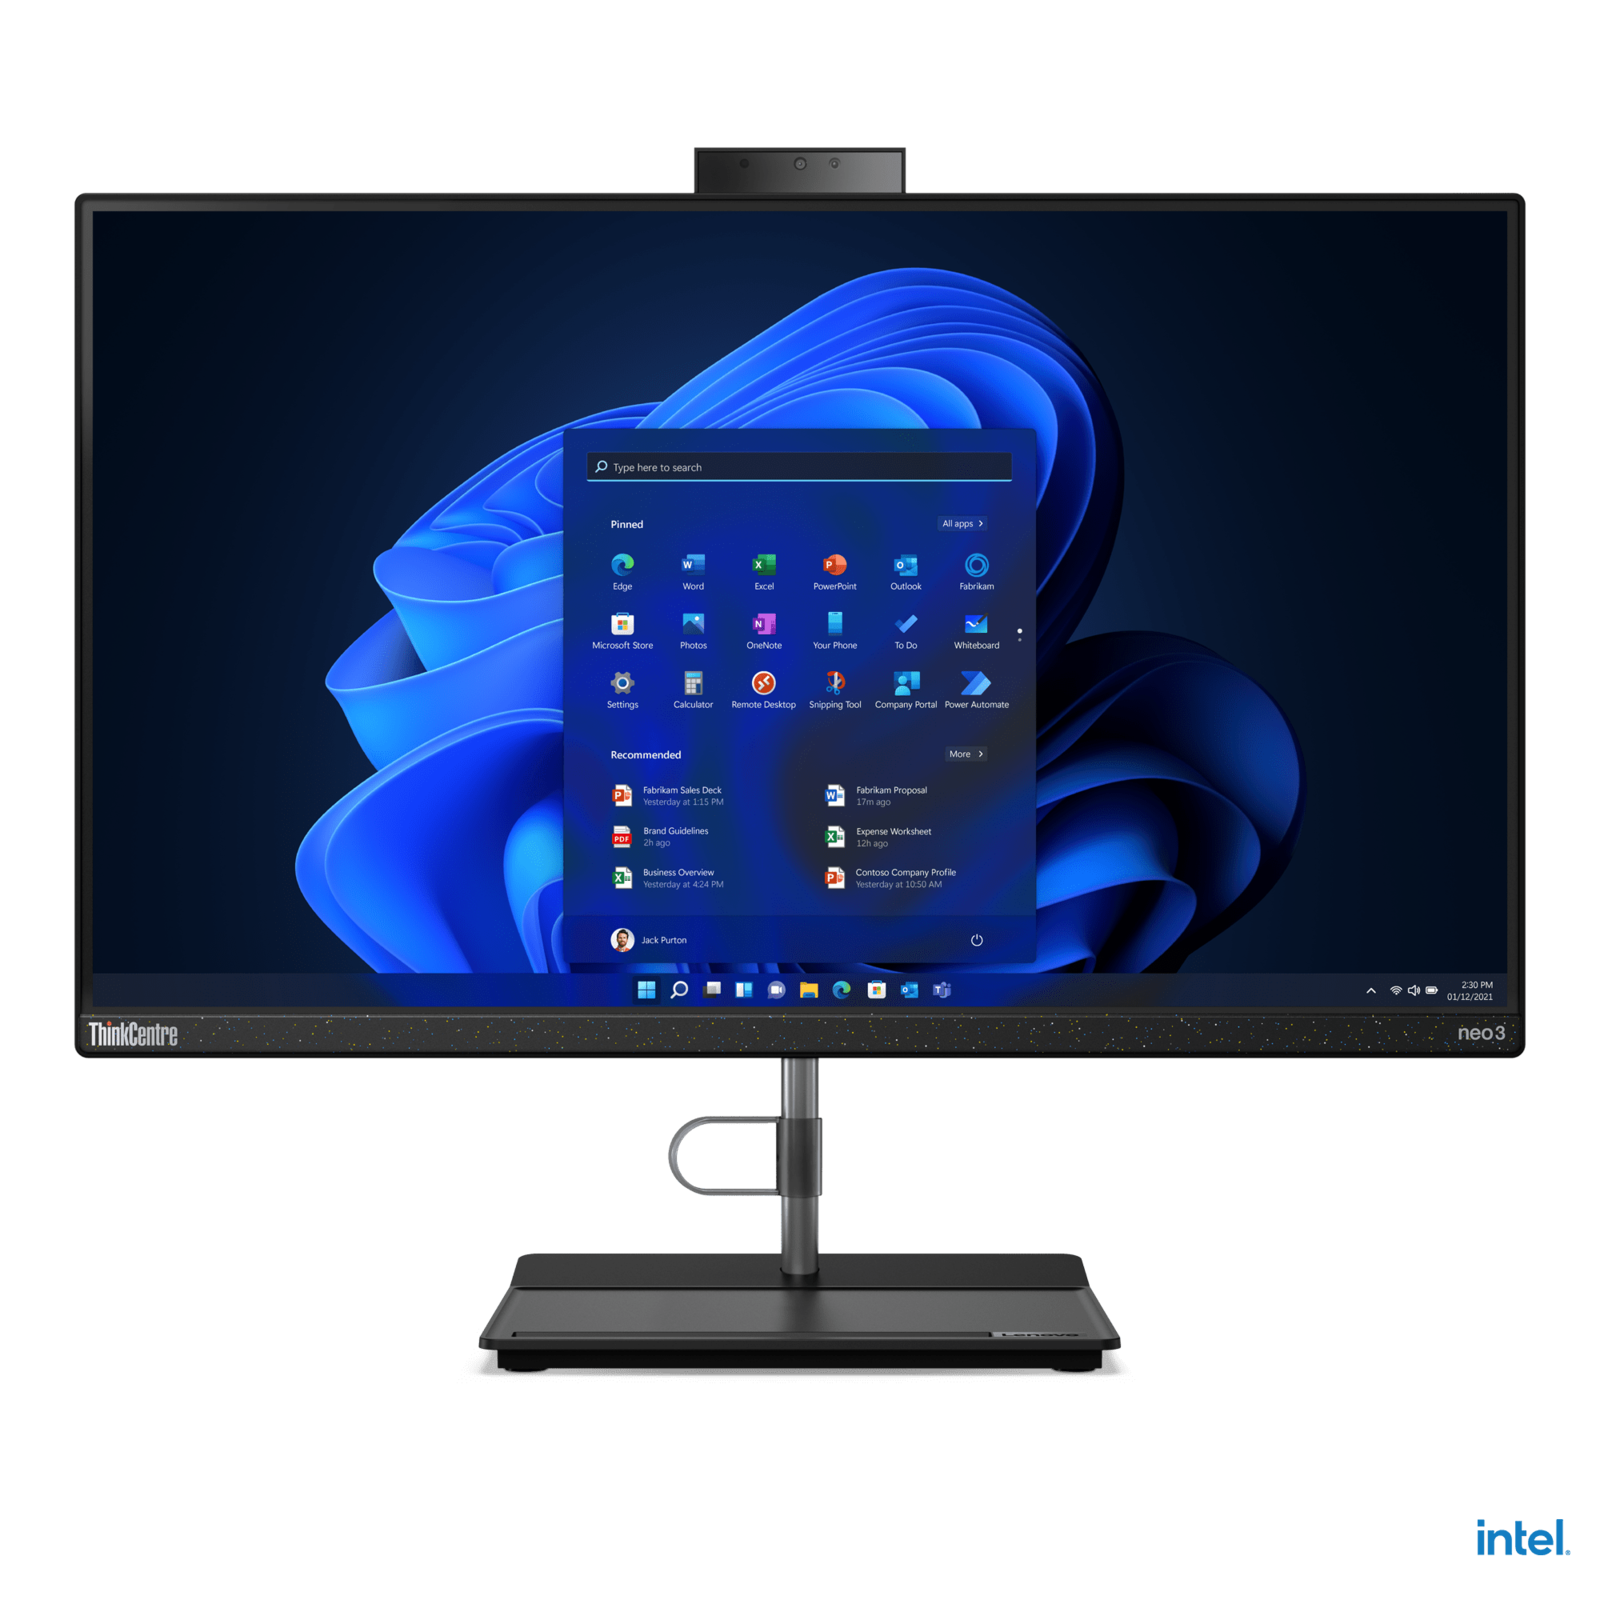 IdeaCentre AIO 5i  24-inch Intel®-powered all-in-one desktop PC